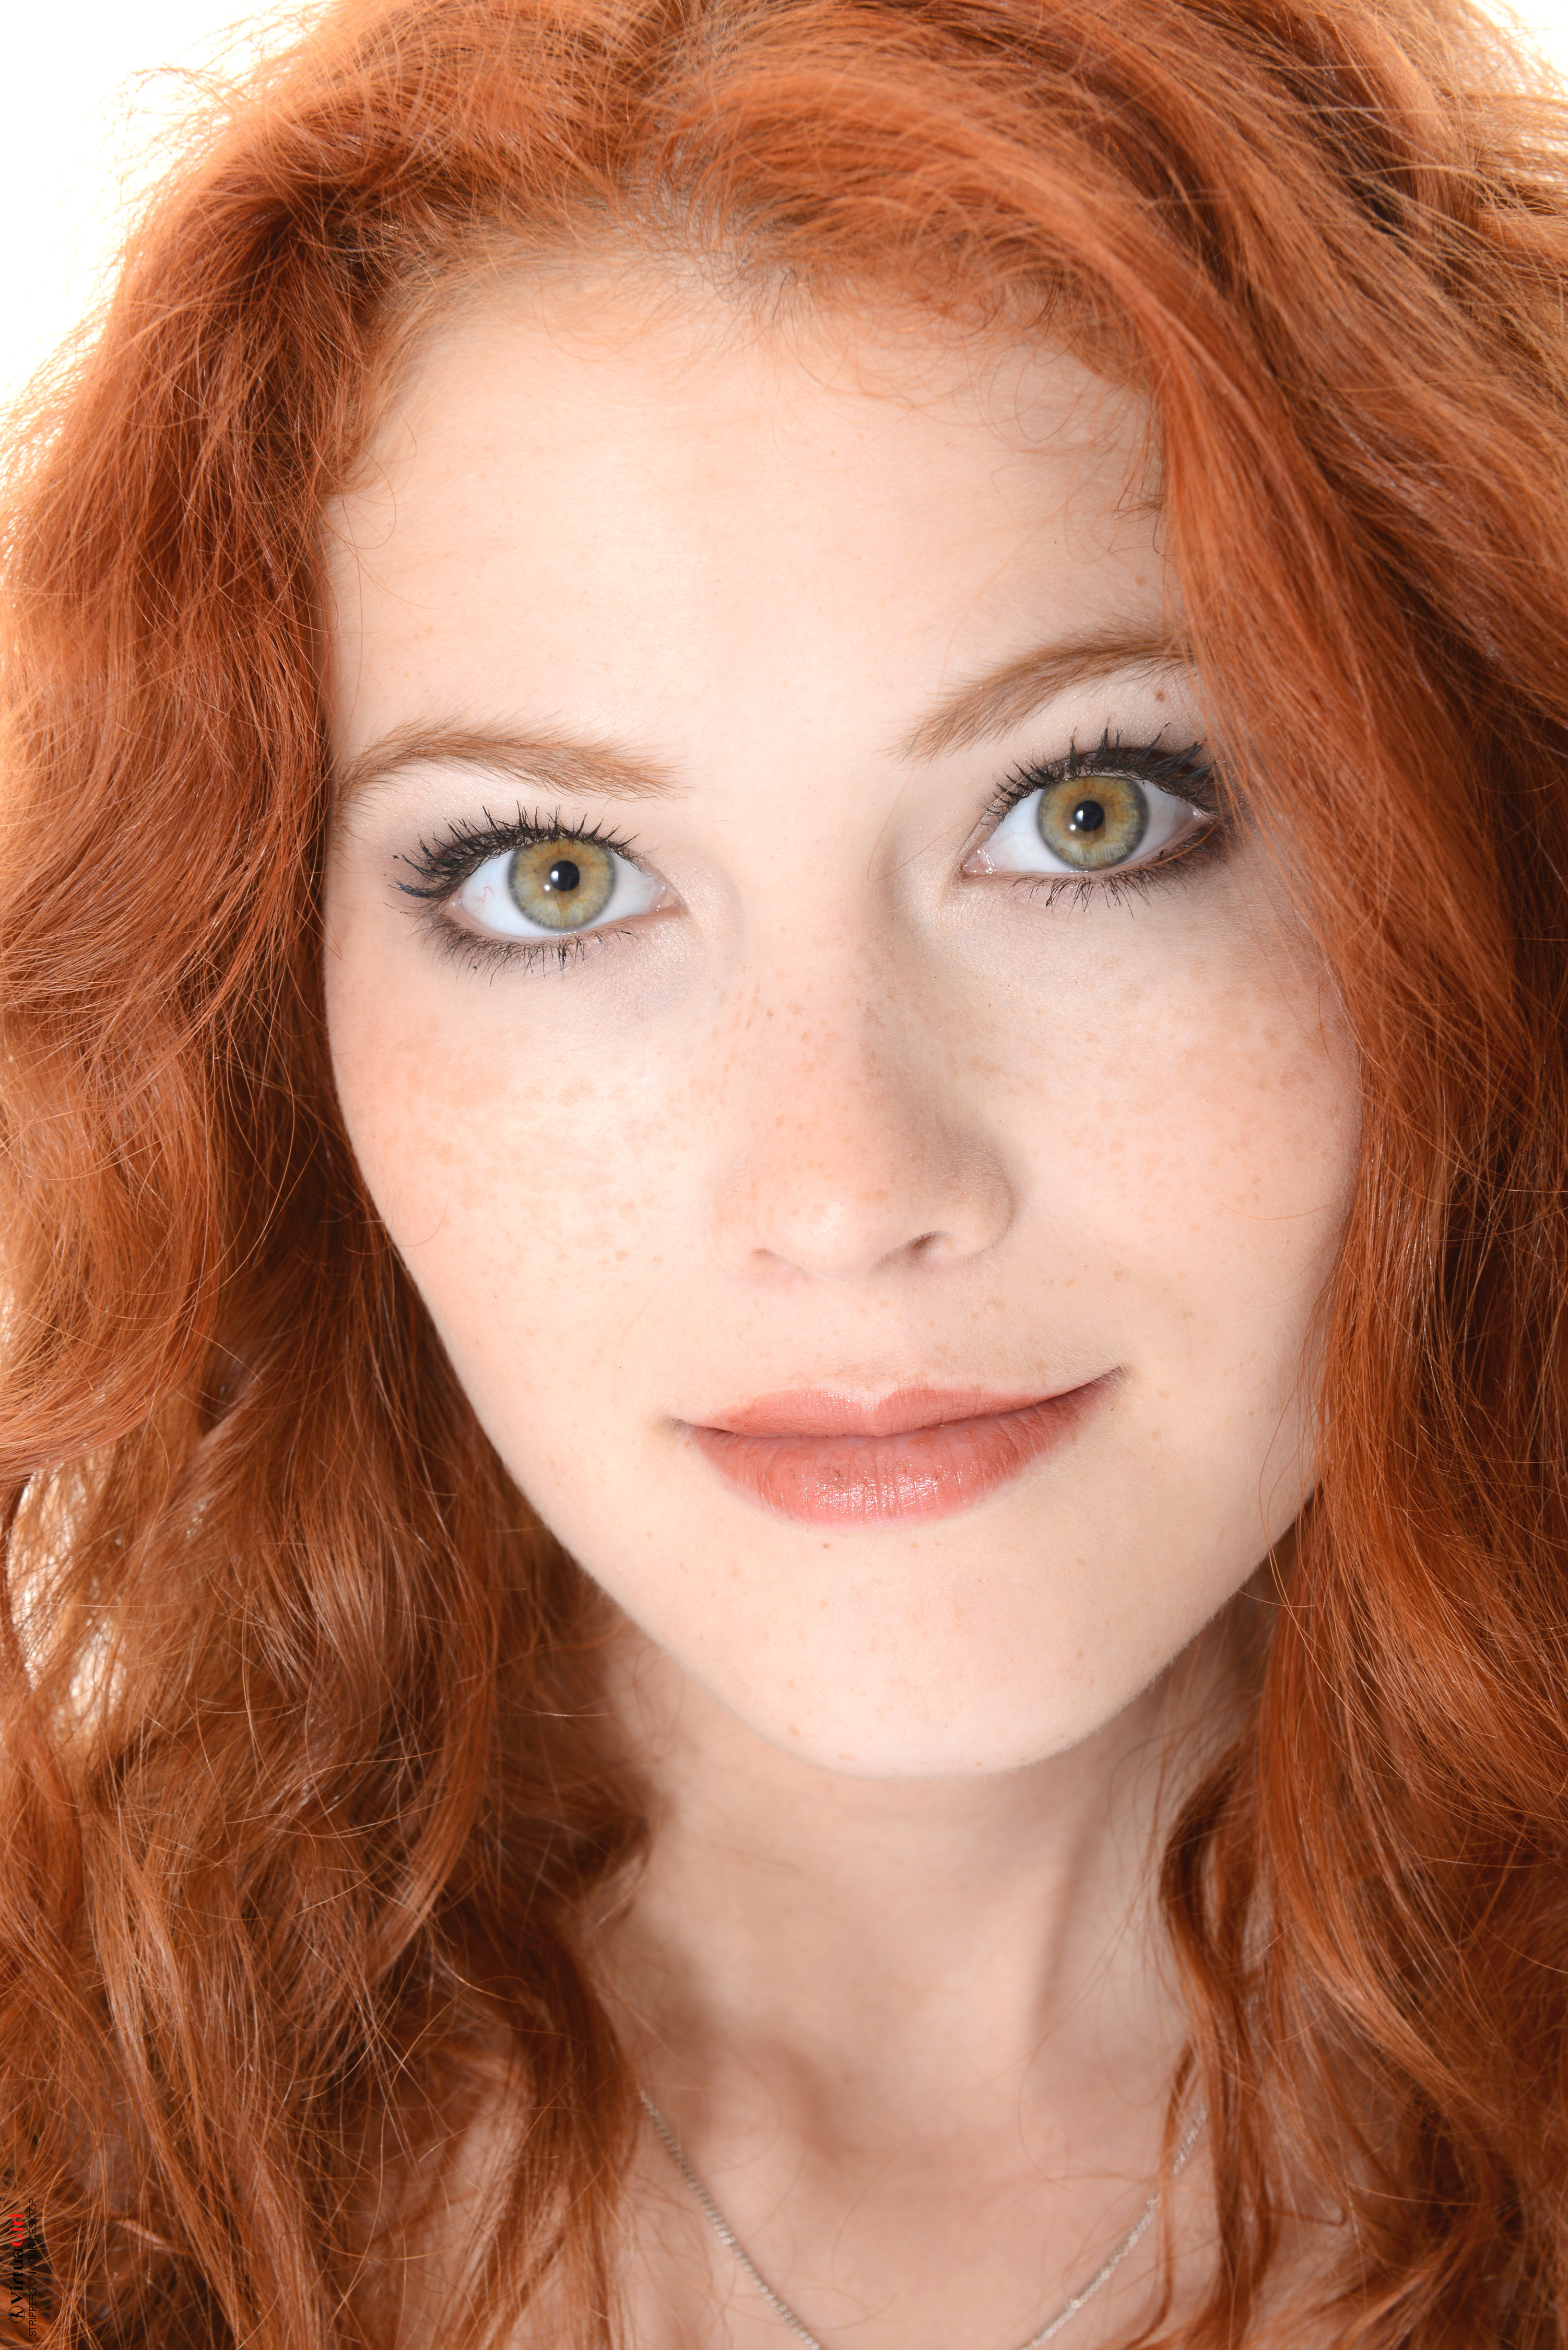 dallas sweatt recommends green eyed red head pic